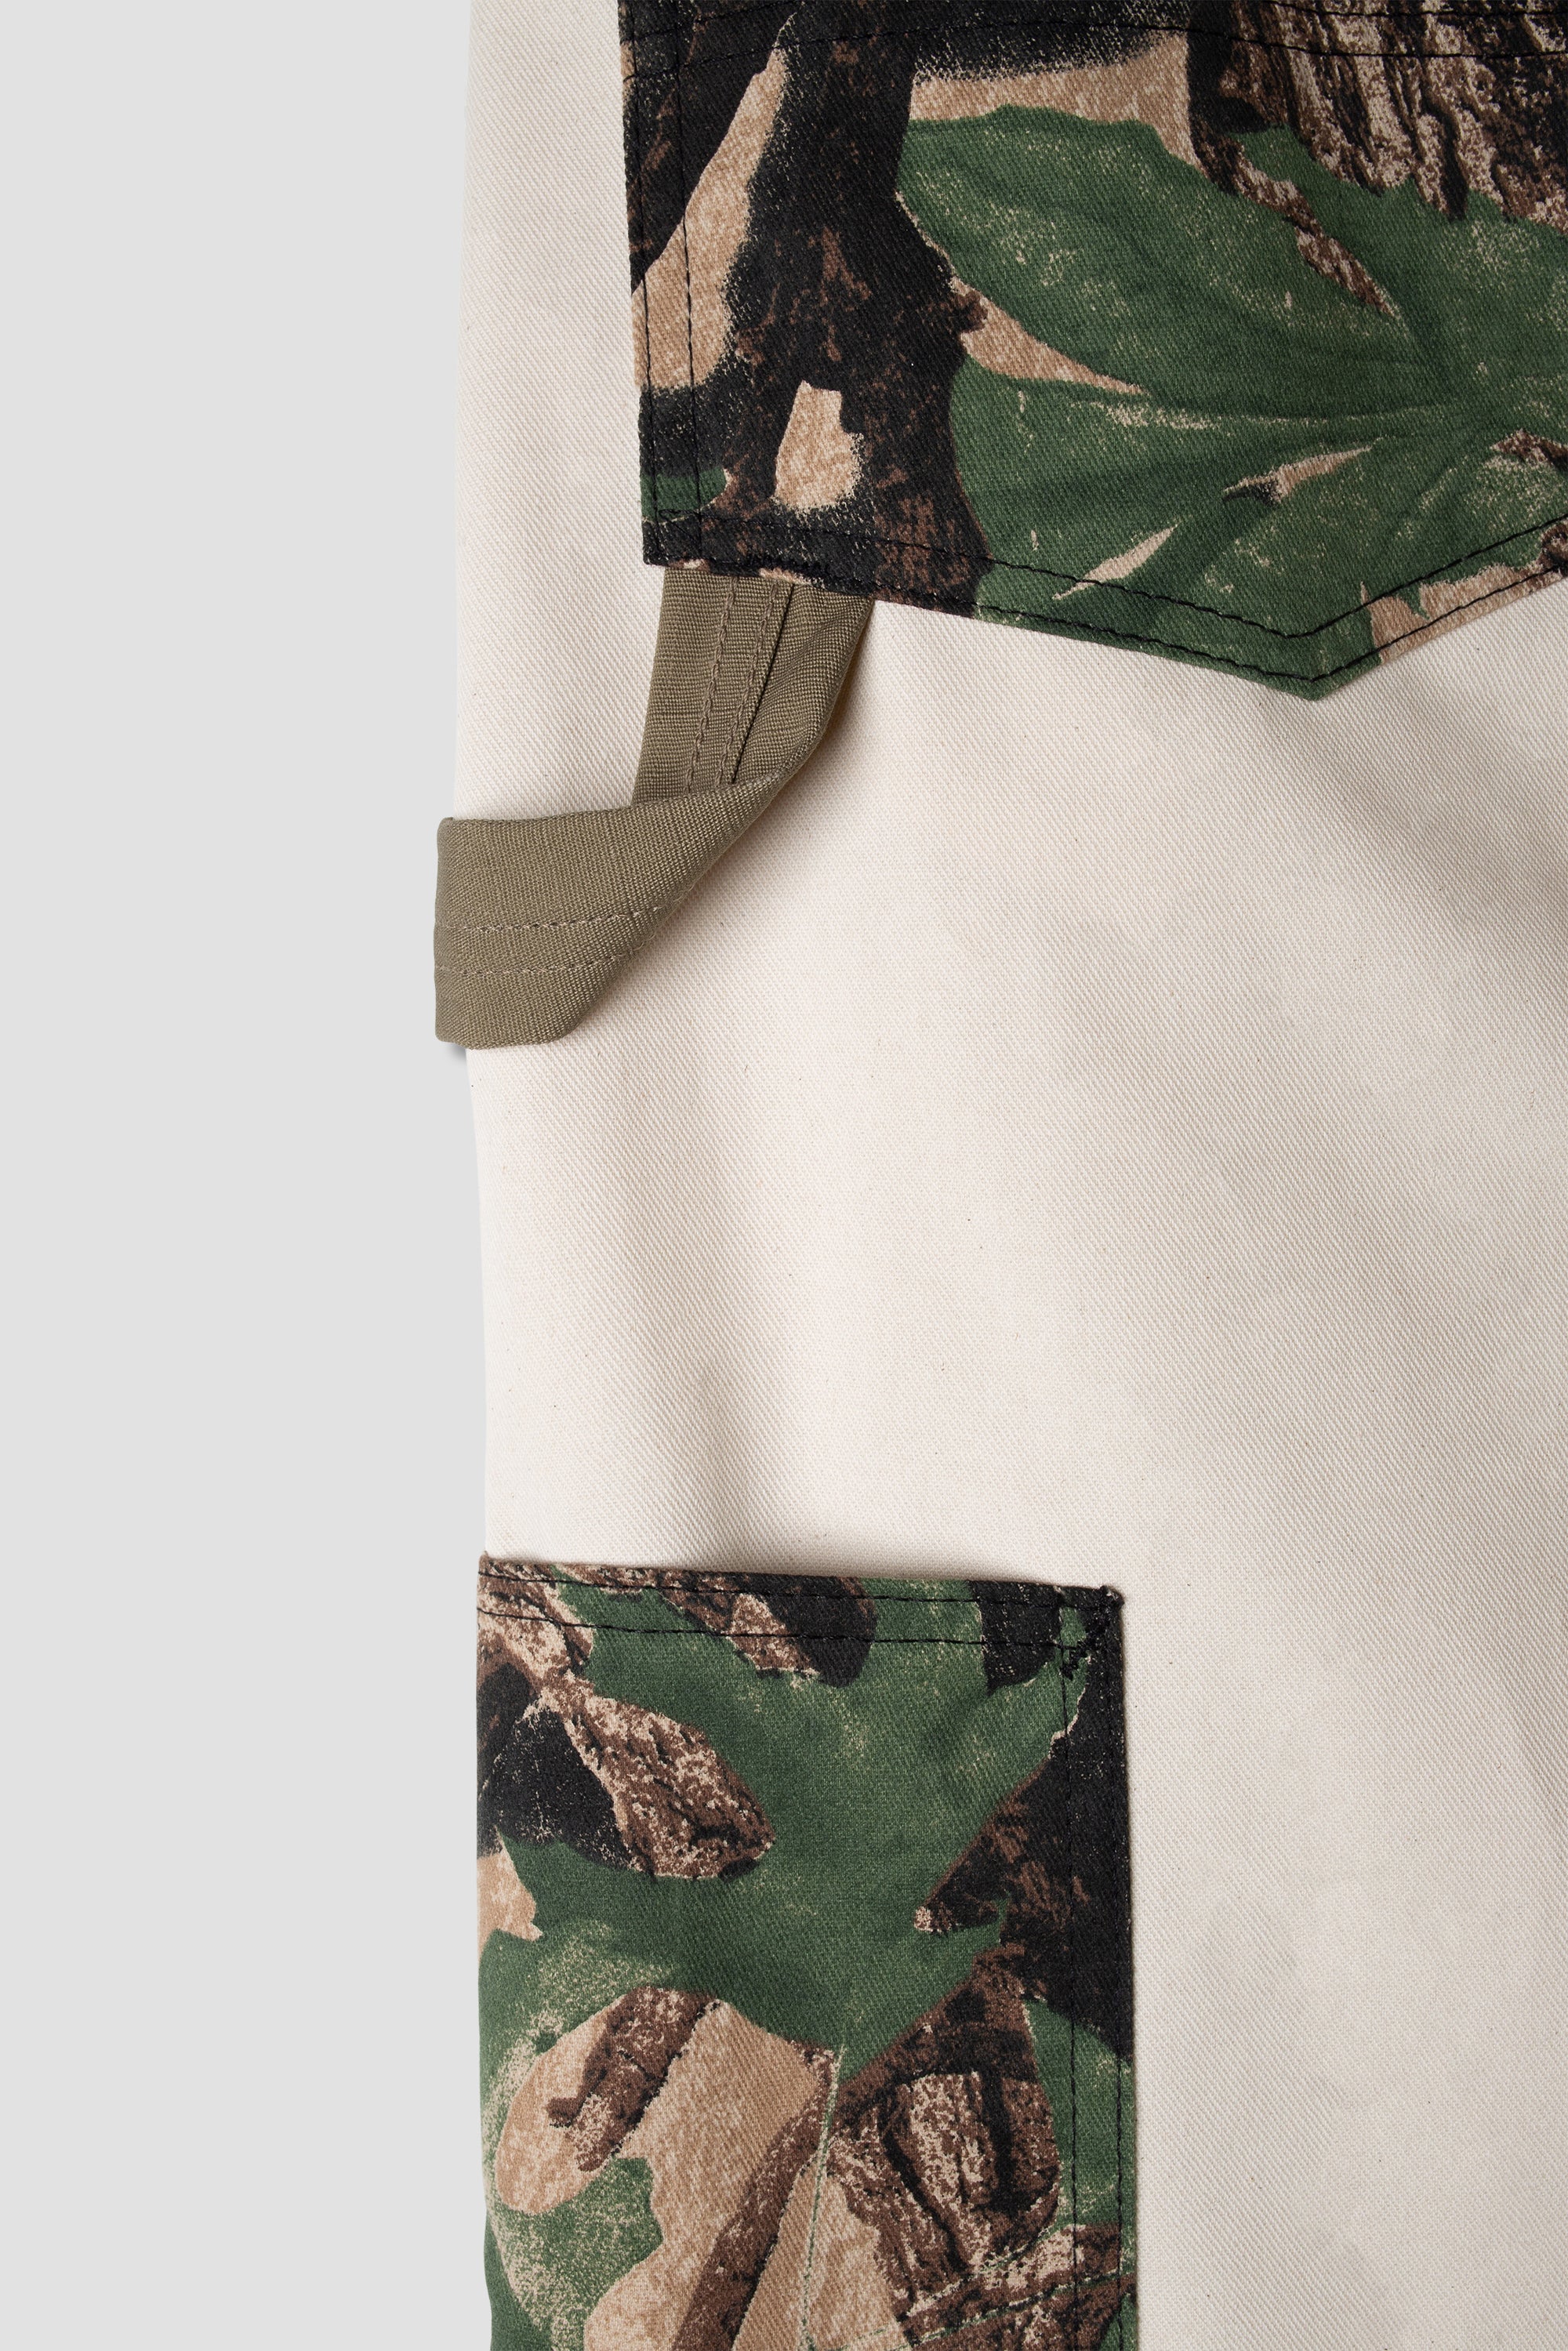 Double Knee Painter Pant (Natural/Forest Photo Stalk Camo) – Stan Ray